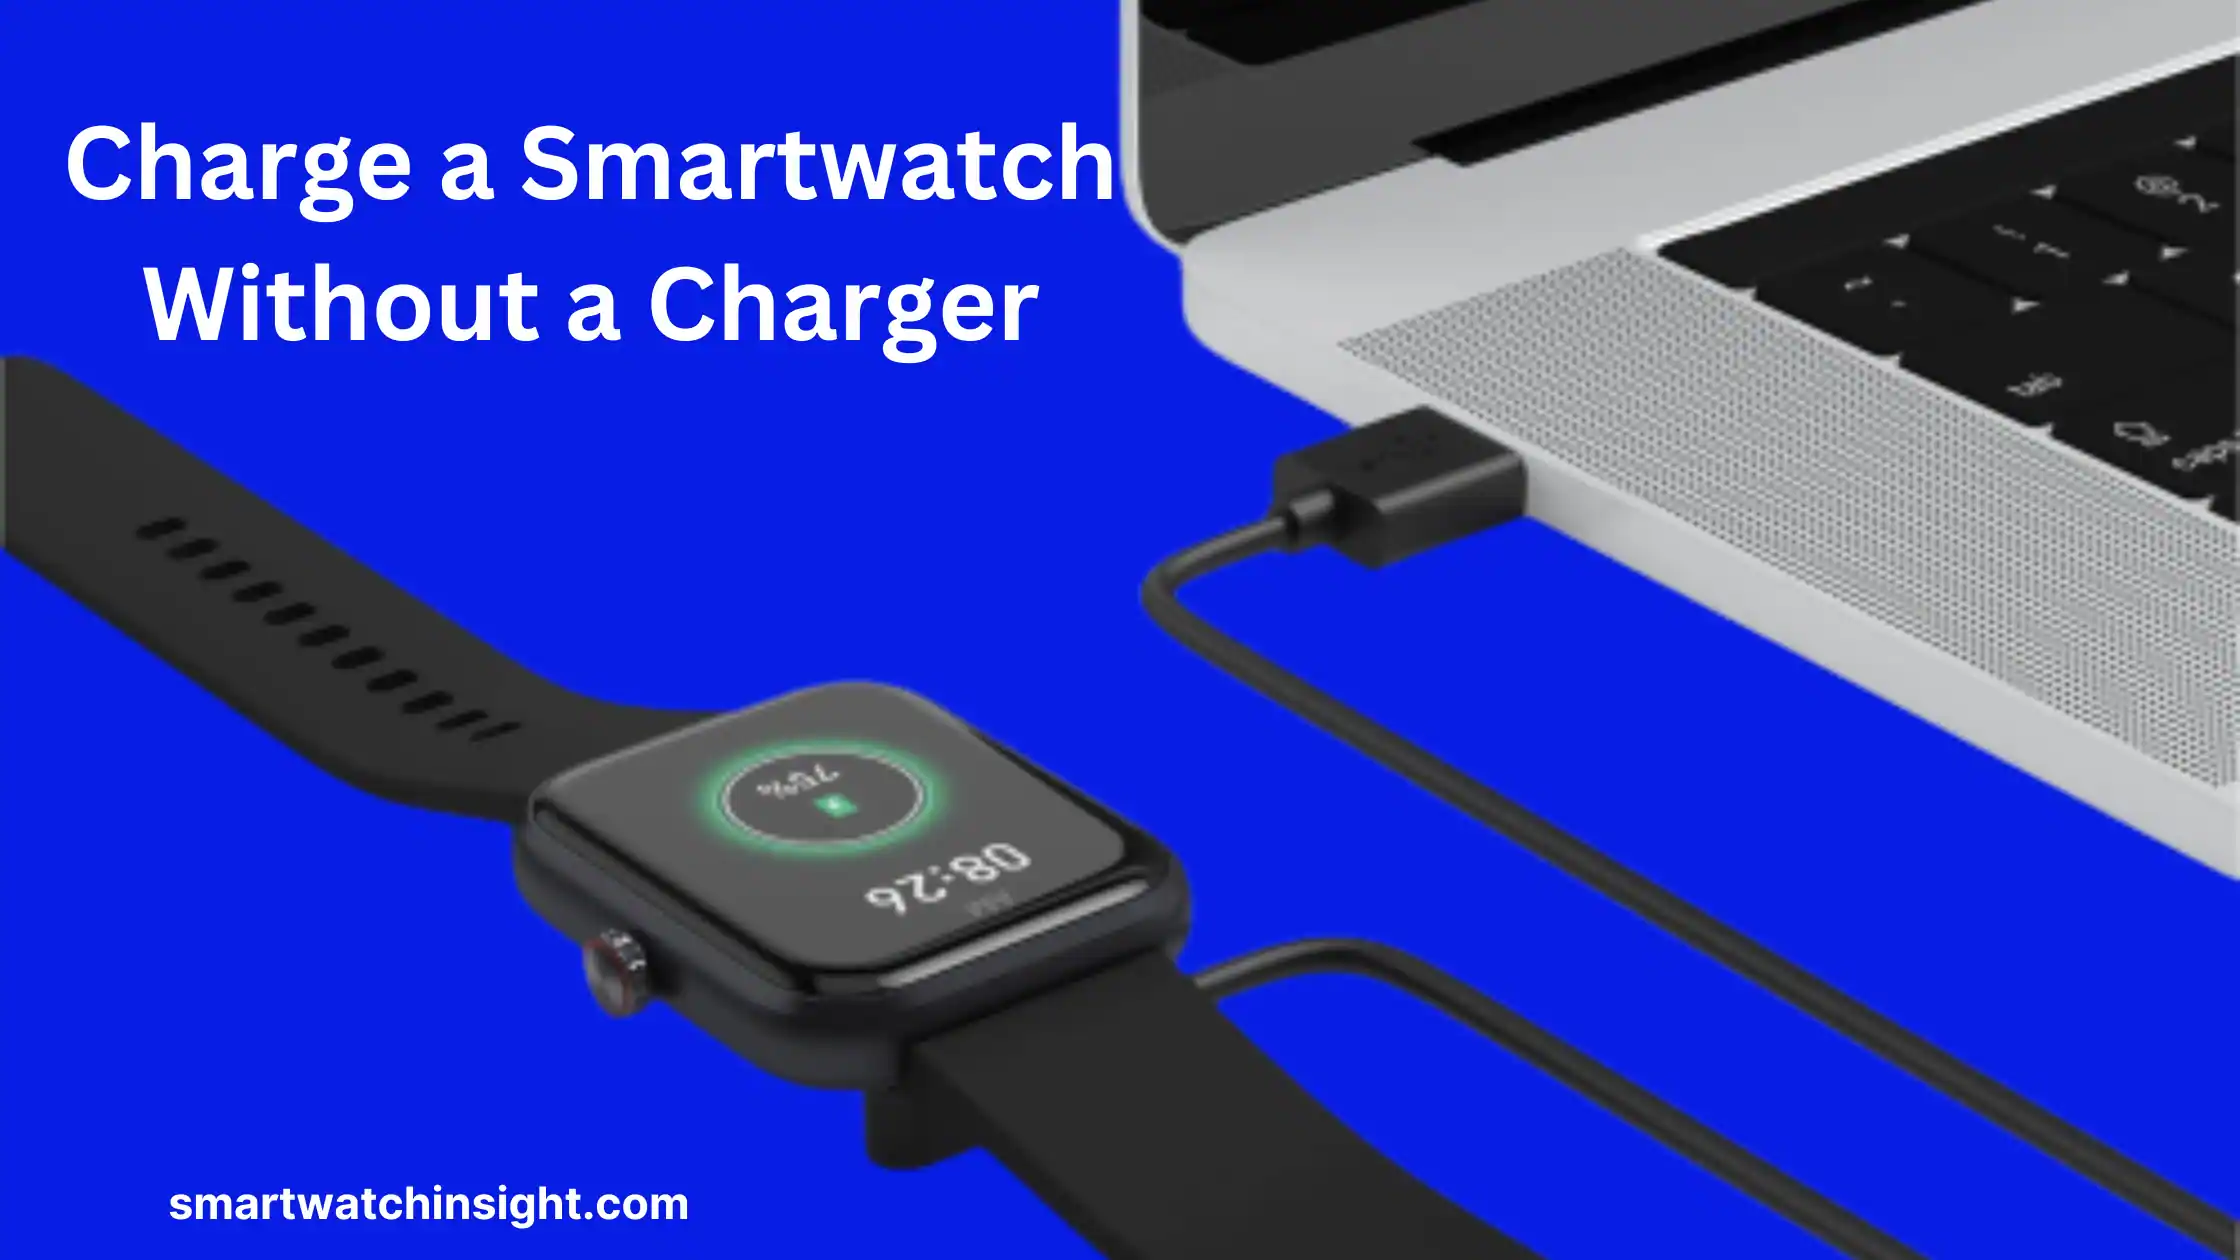 How to Charge a Smartwatch Without a Charger